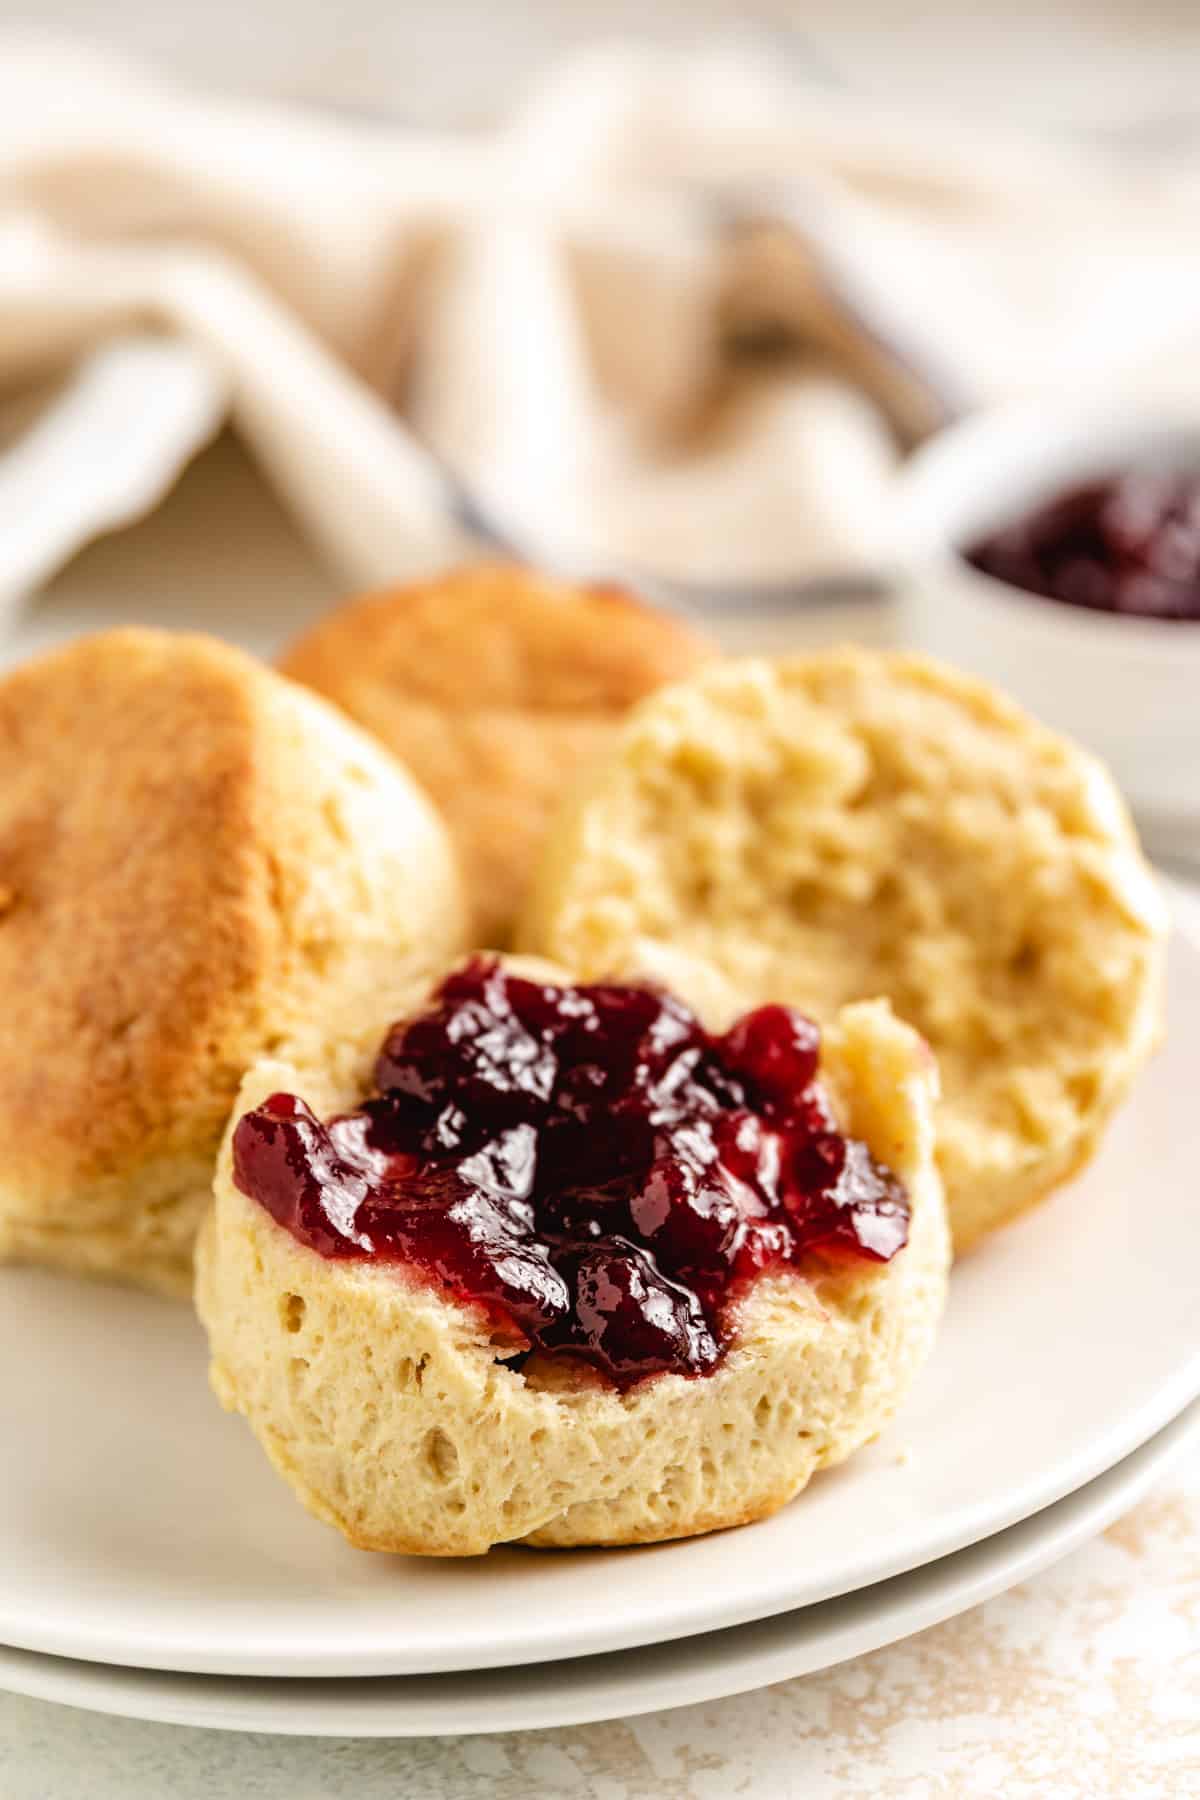 Plate of biscuits and jelly.